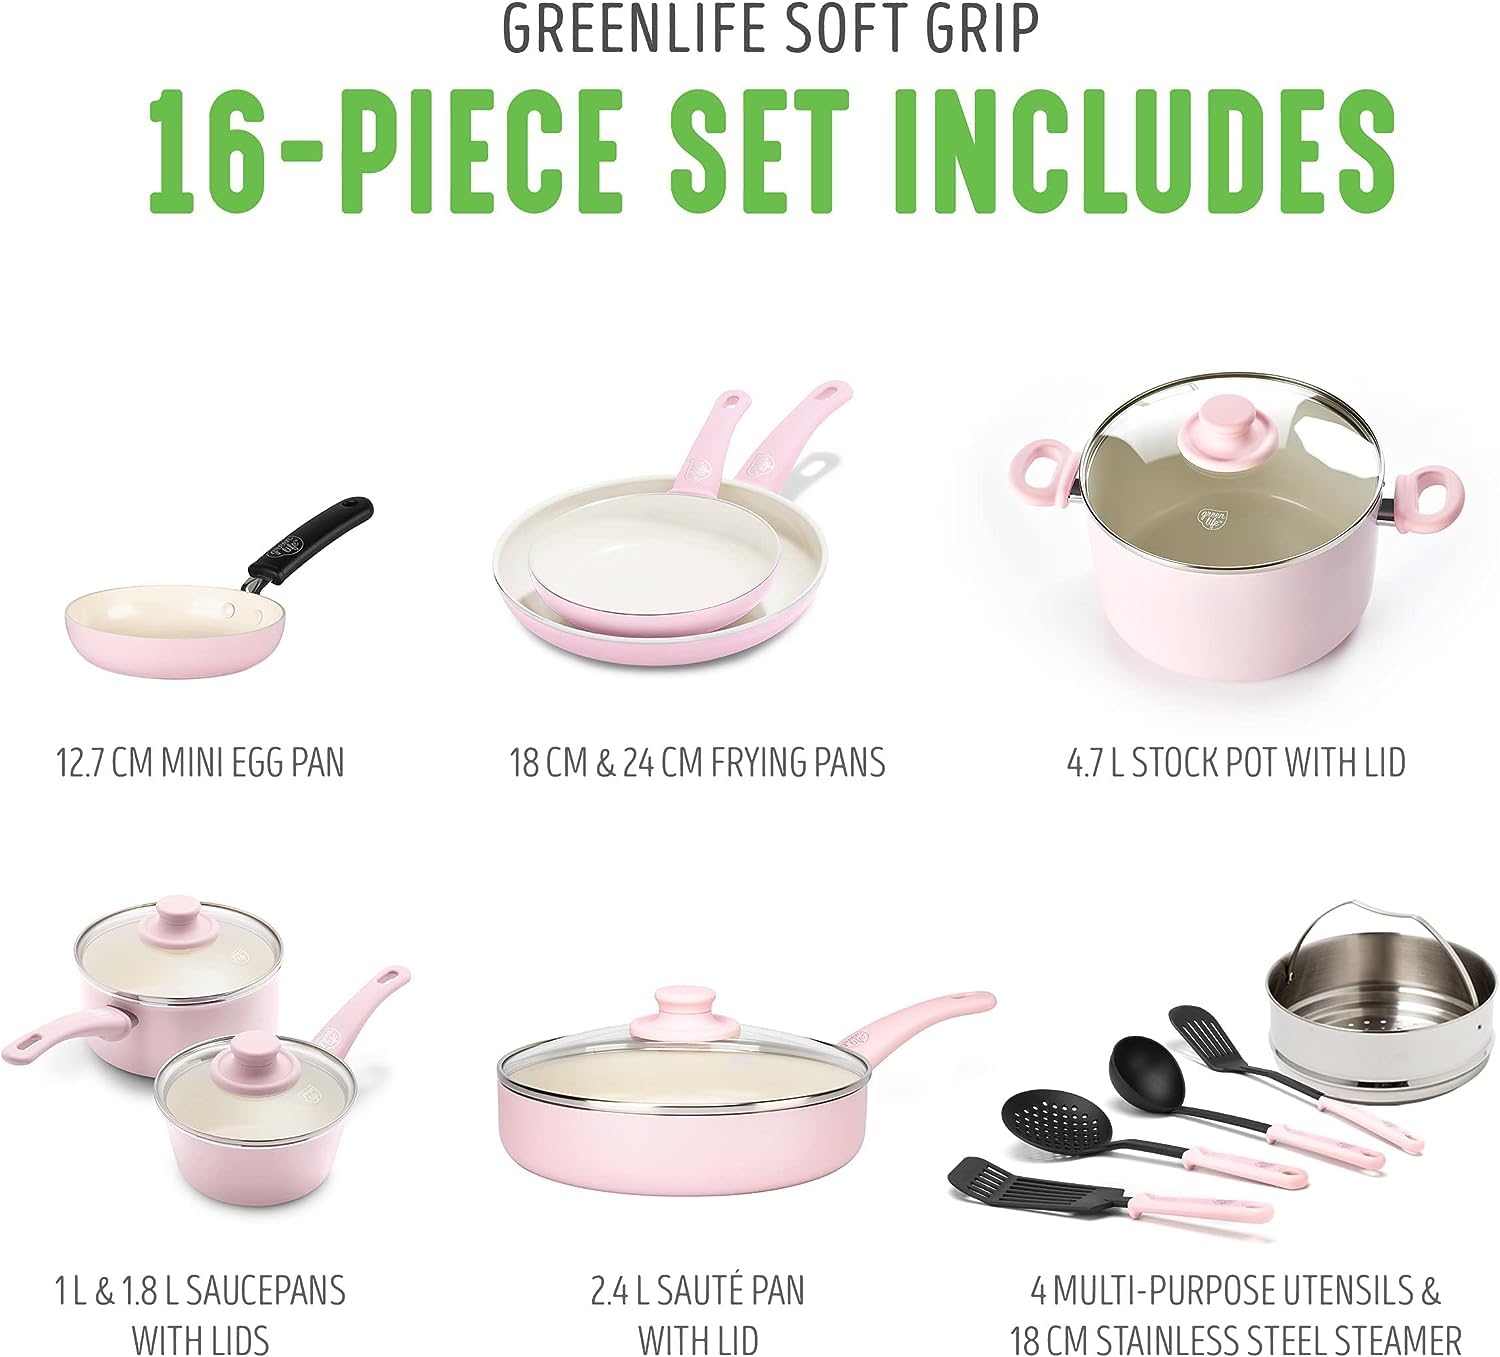 GreenLife Soft Grip Healthy Ceramic Nonstick 16 Piece Kitchen Cookware Pots and Frying Sauce Pans Set, PFAS-Free, Dishwasher Safe, Soft Pink